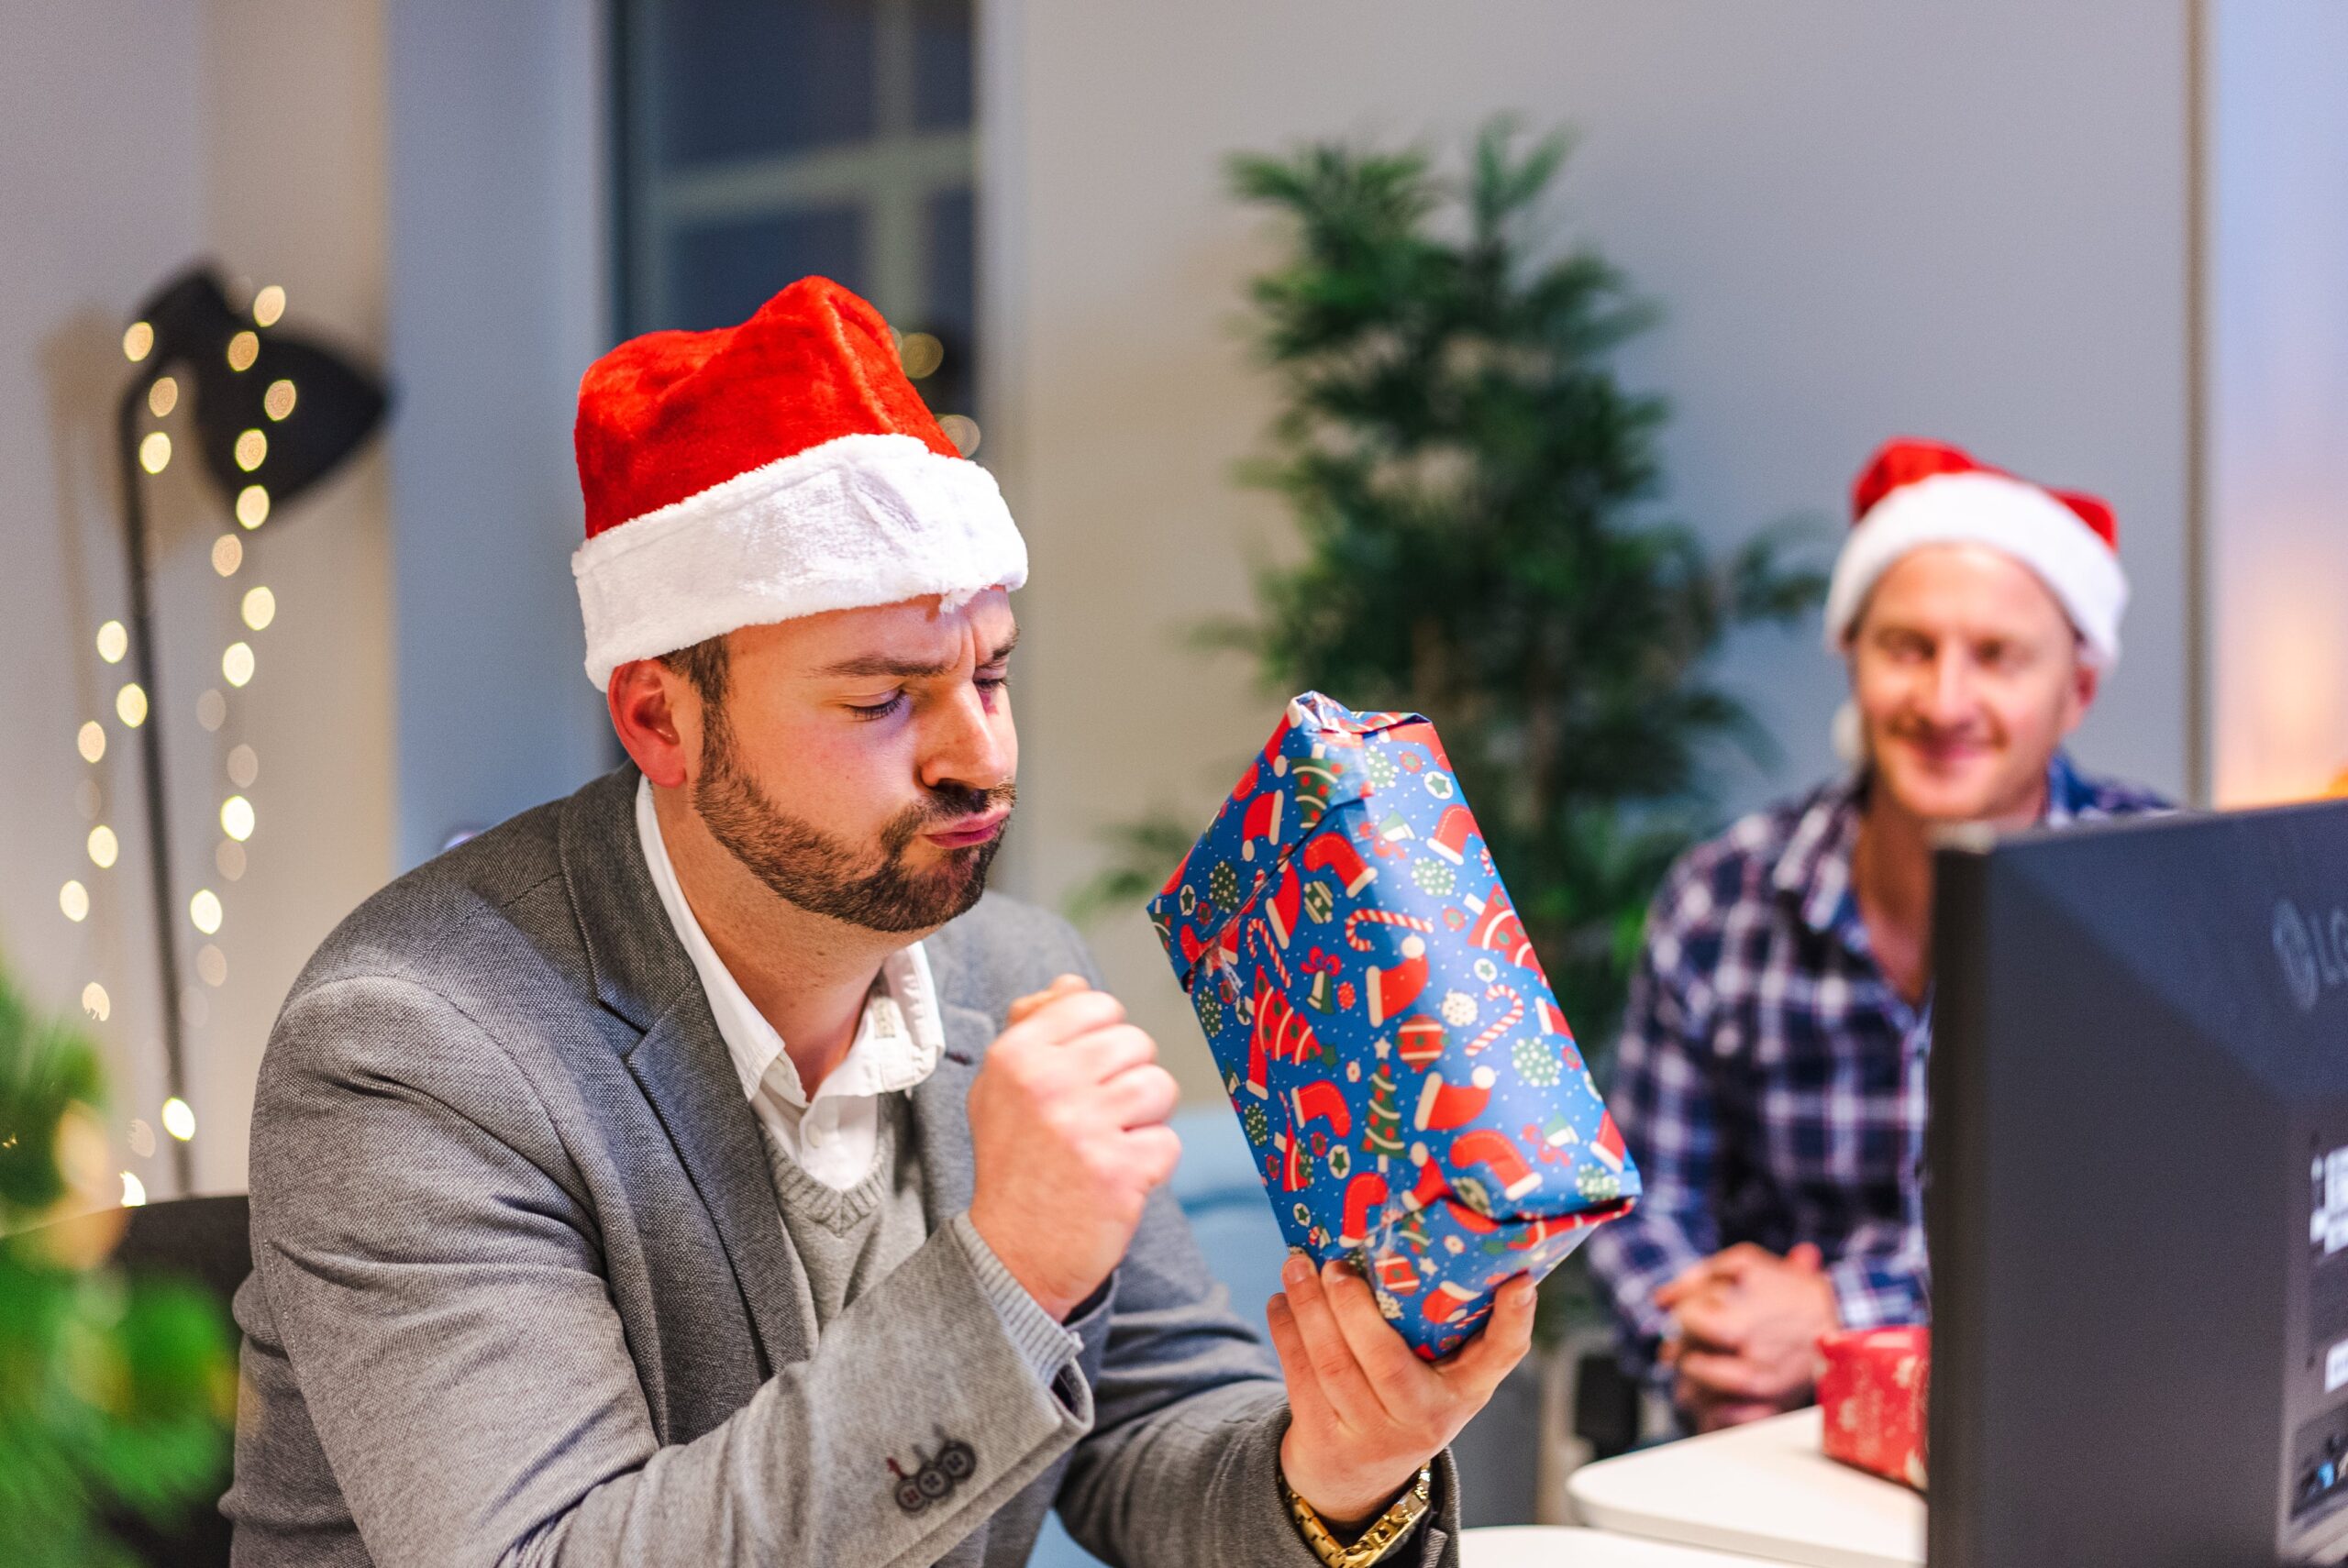 Christmas present exchange in the office